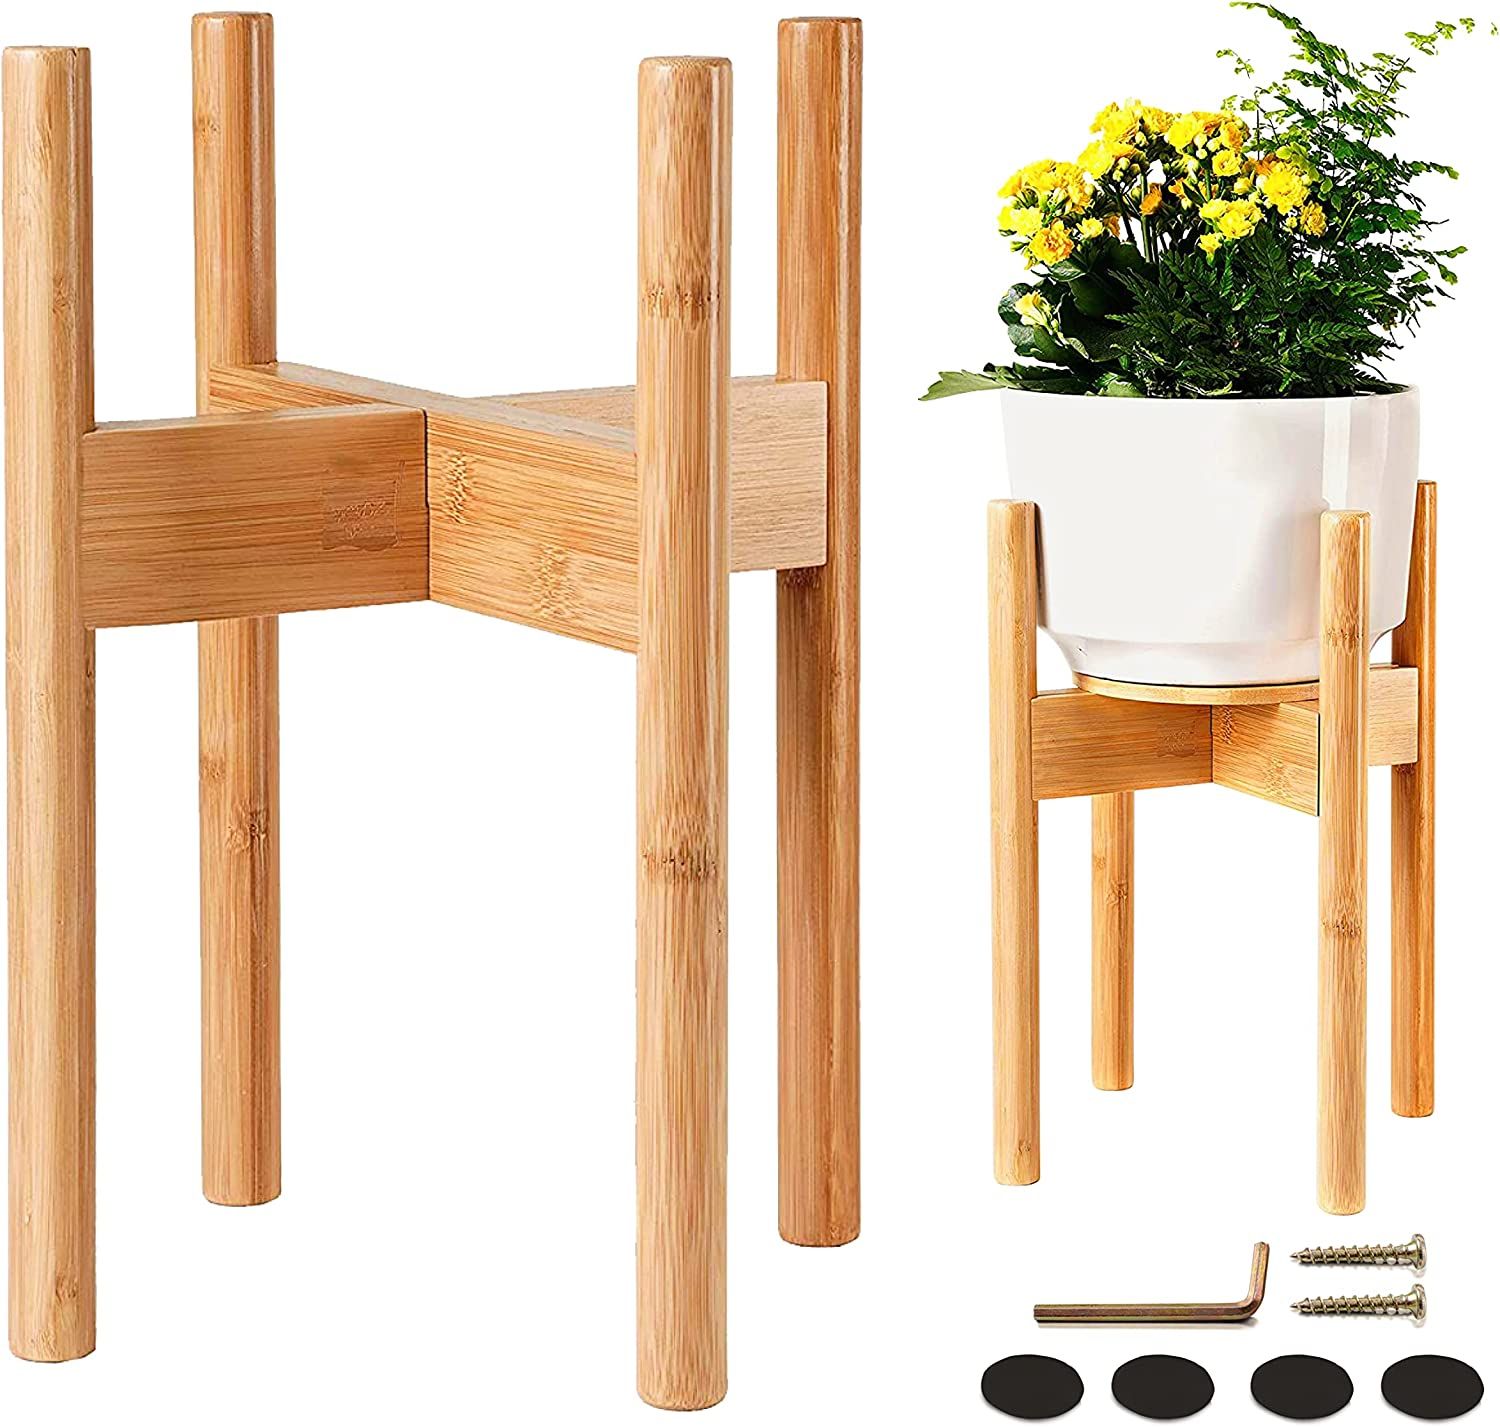 Plant Stand Indoor – Bamboo Wood, Full Adjustable, Holds 8 10 And 12 Inch  Plante | Ebay With 12 Inch Plant Stands (View 8 of 15)